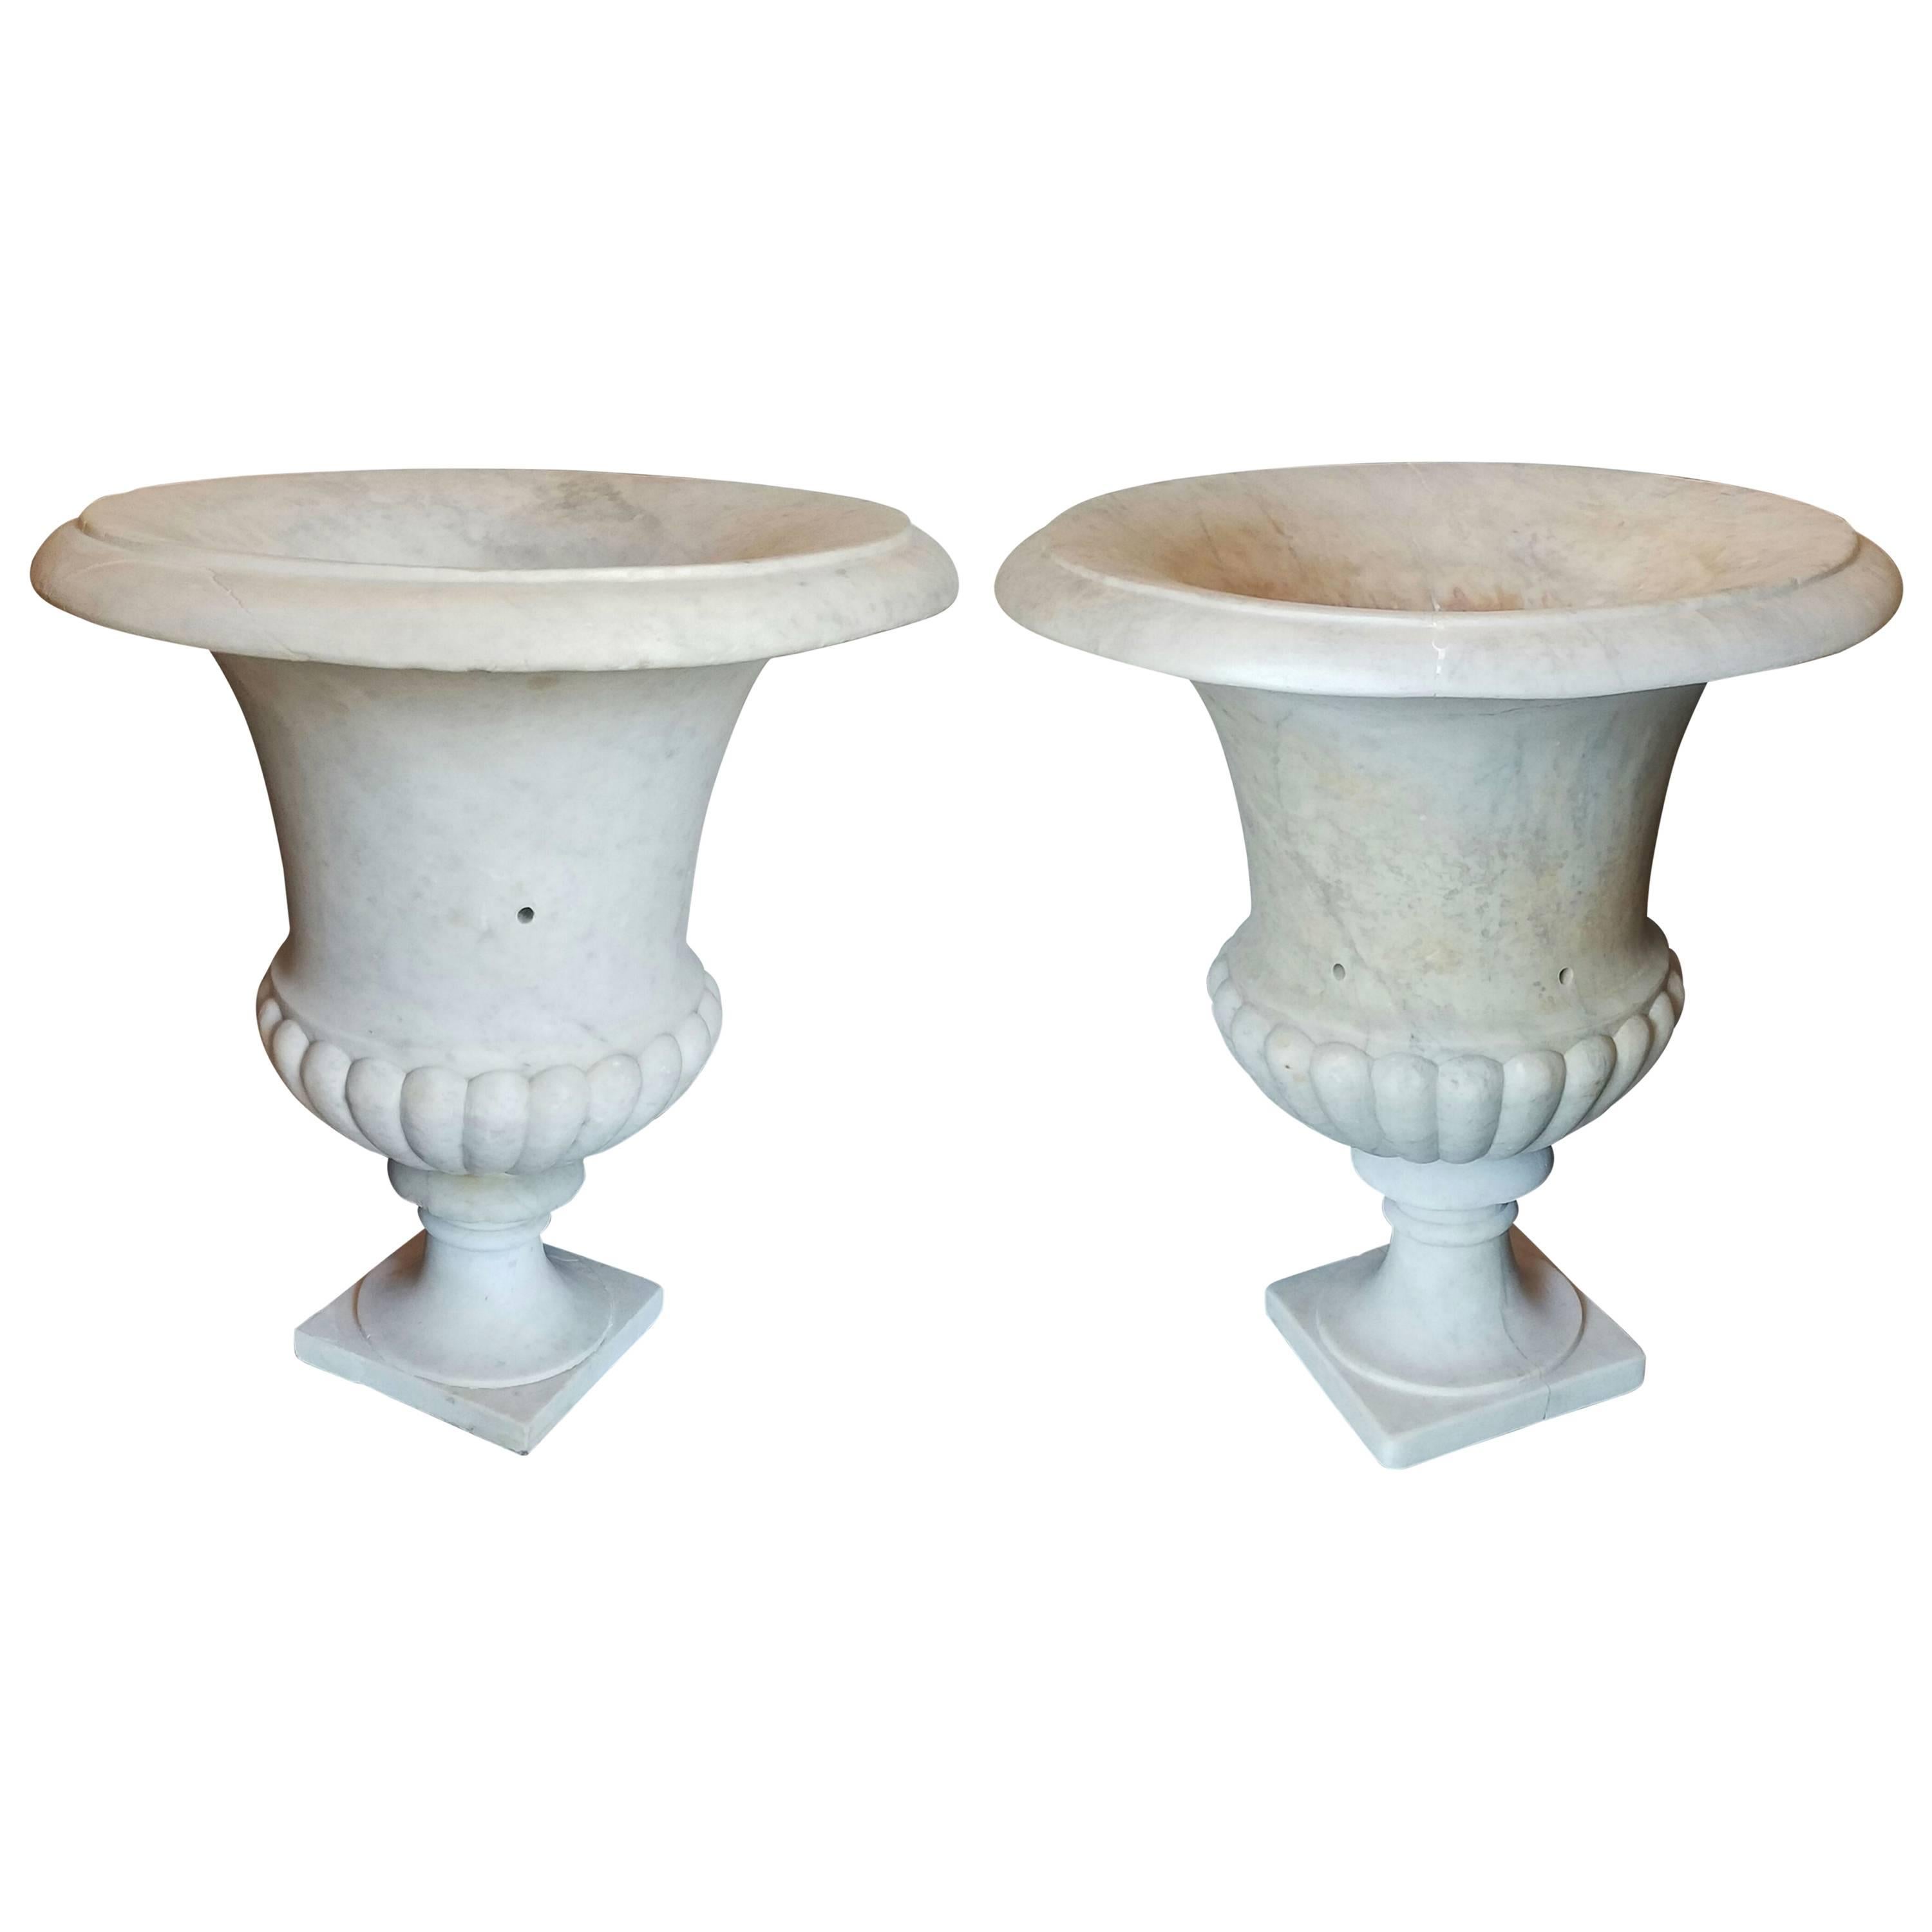 Large Pair of 19th Century Carved Marble Campana Form Garden Urns For Sale